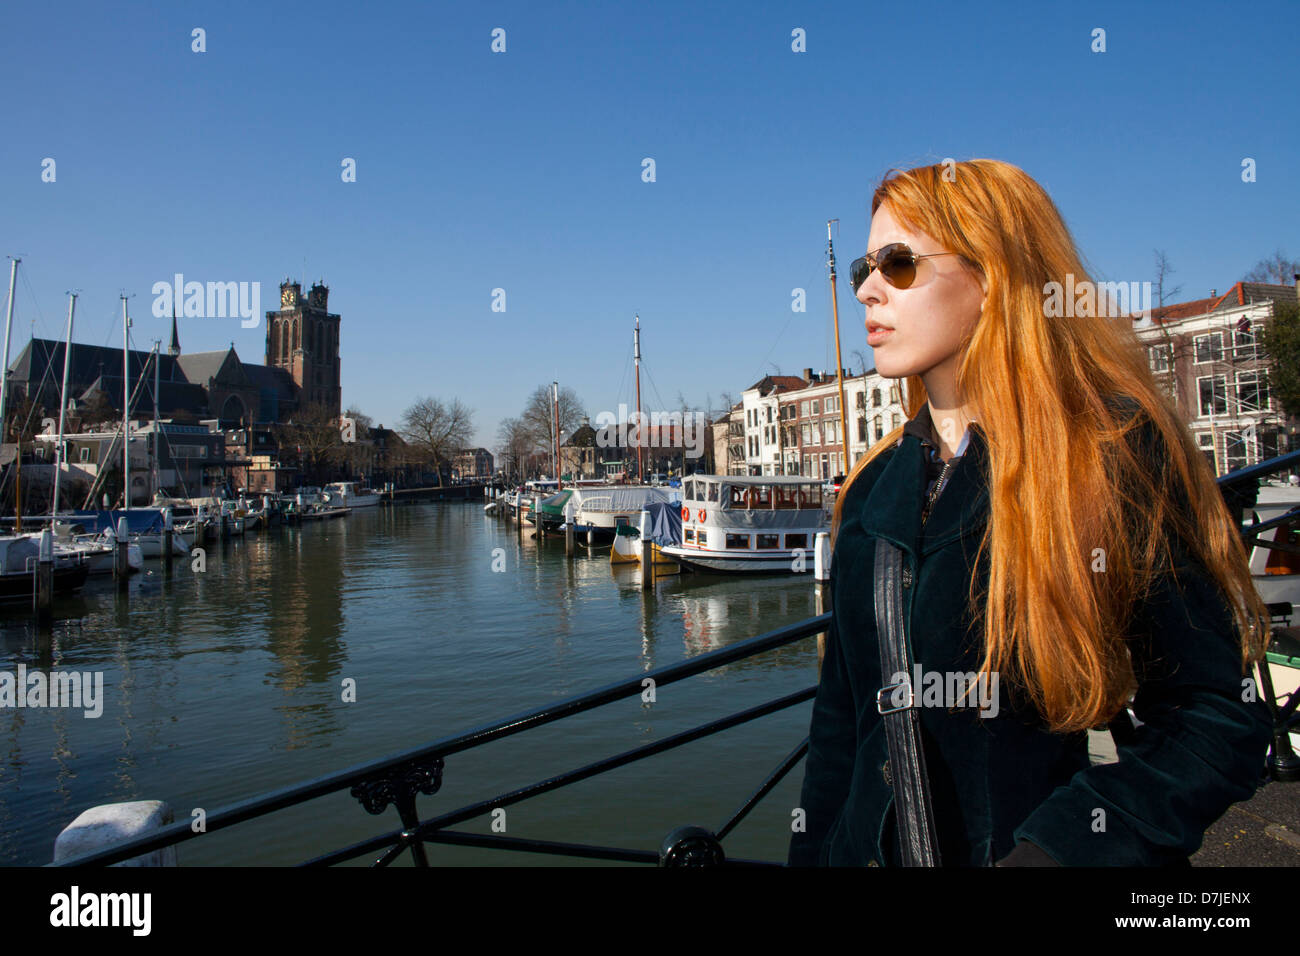 redhair in Netherlands Stock Photo